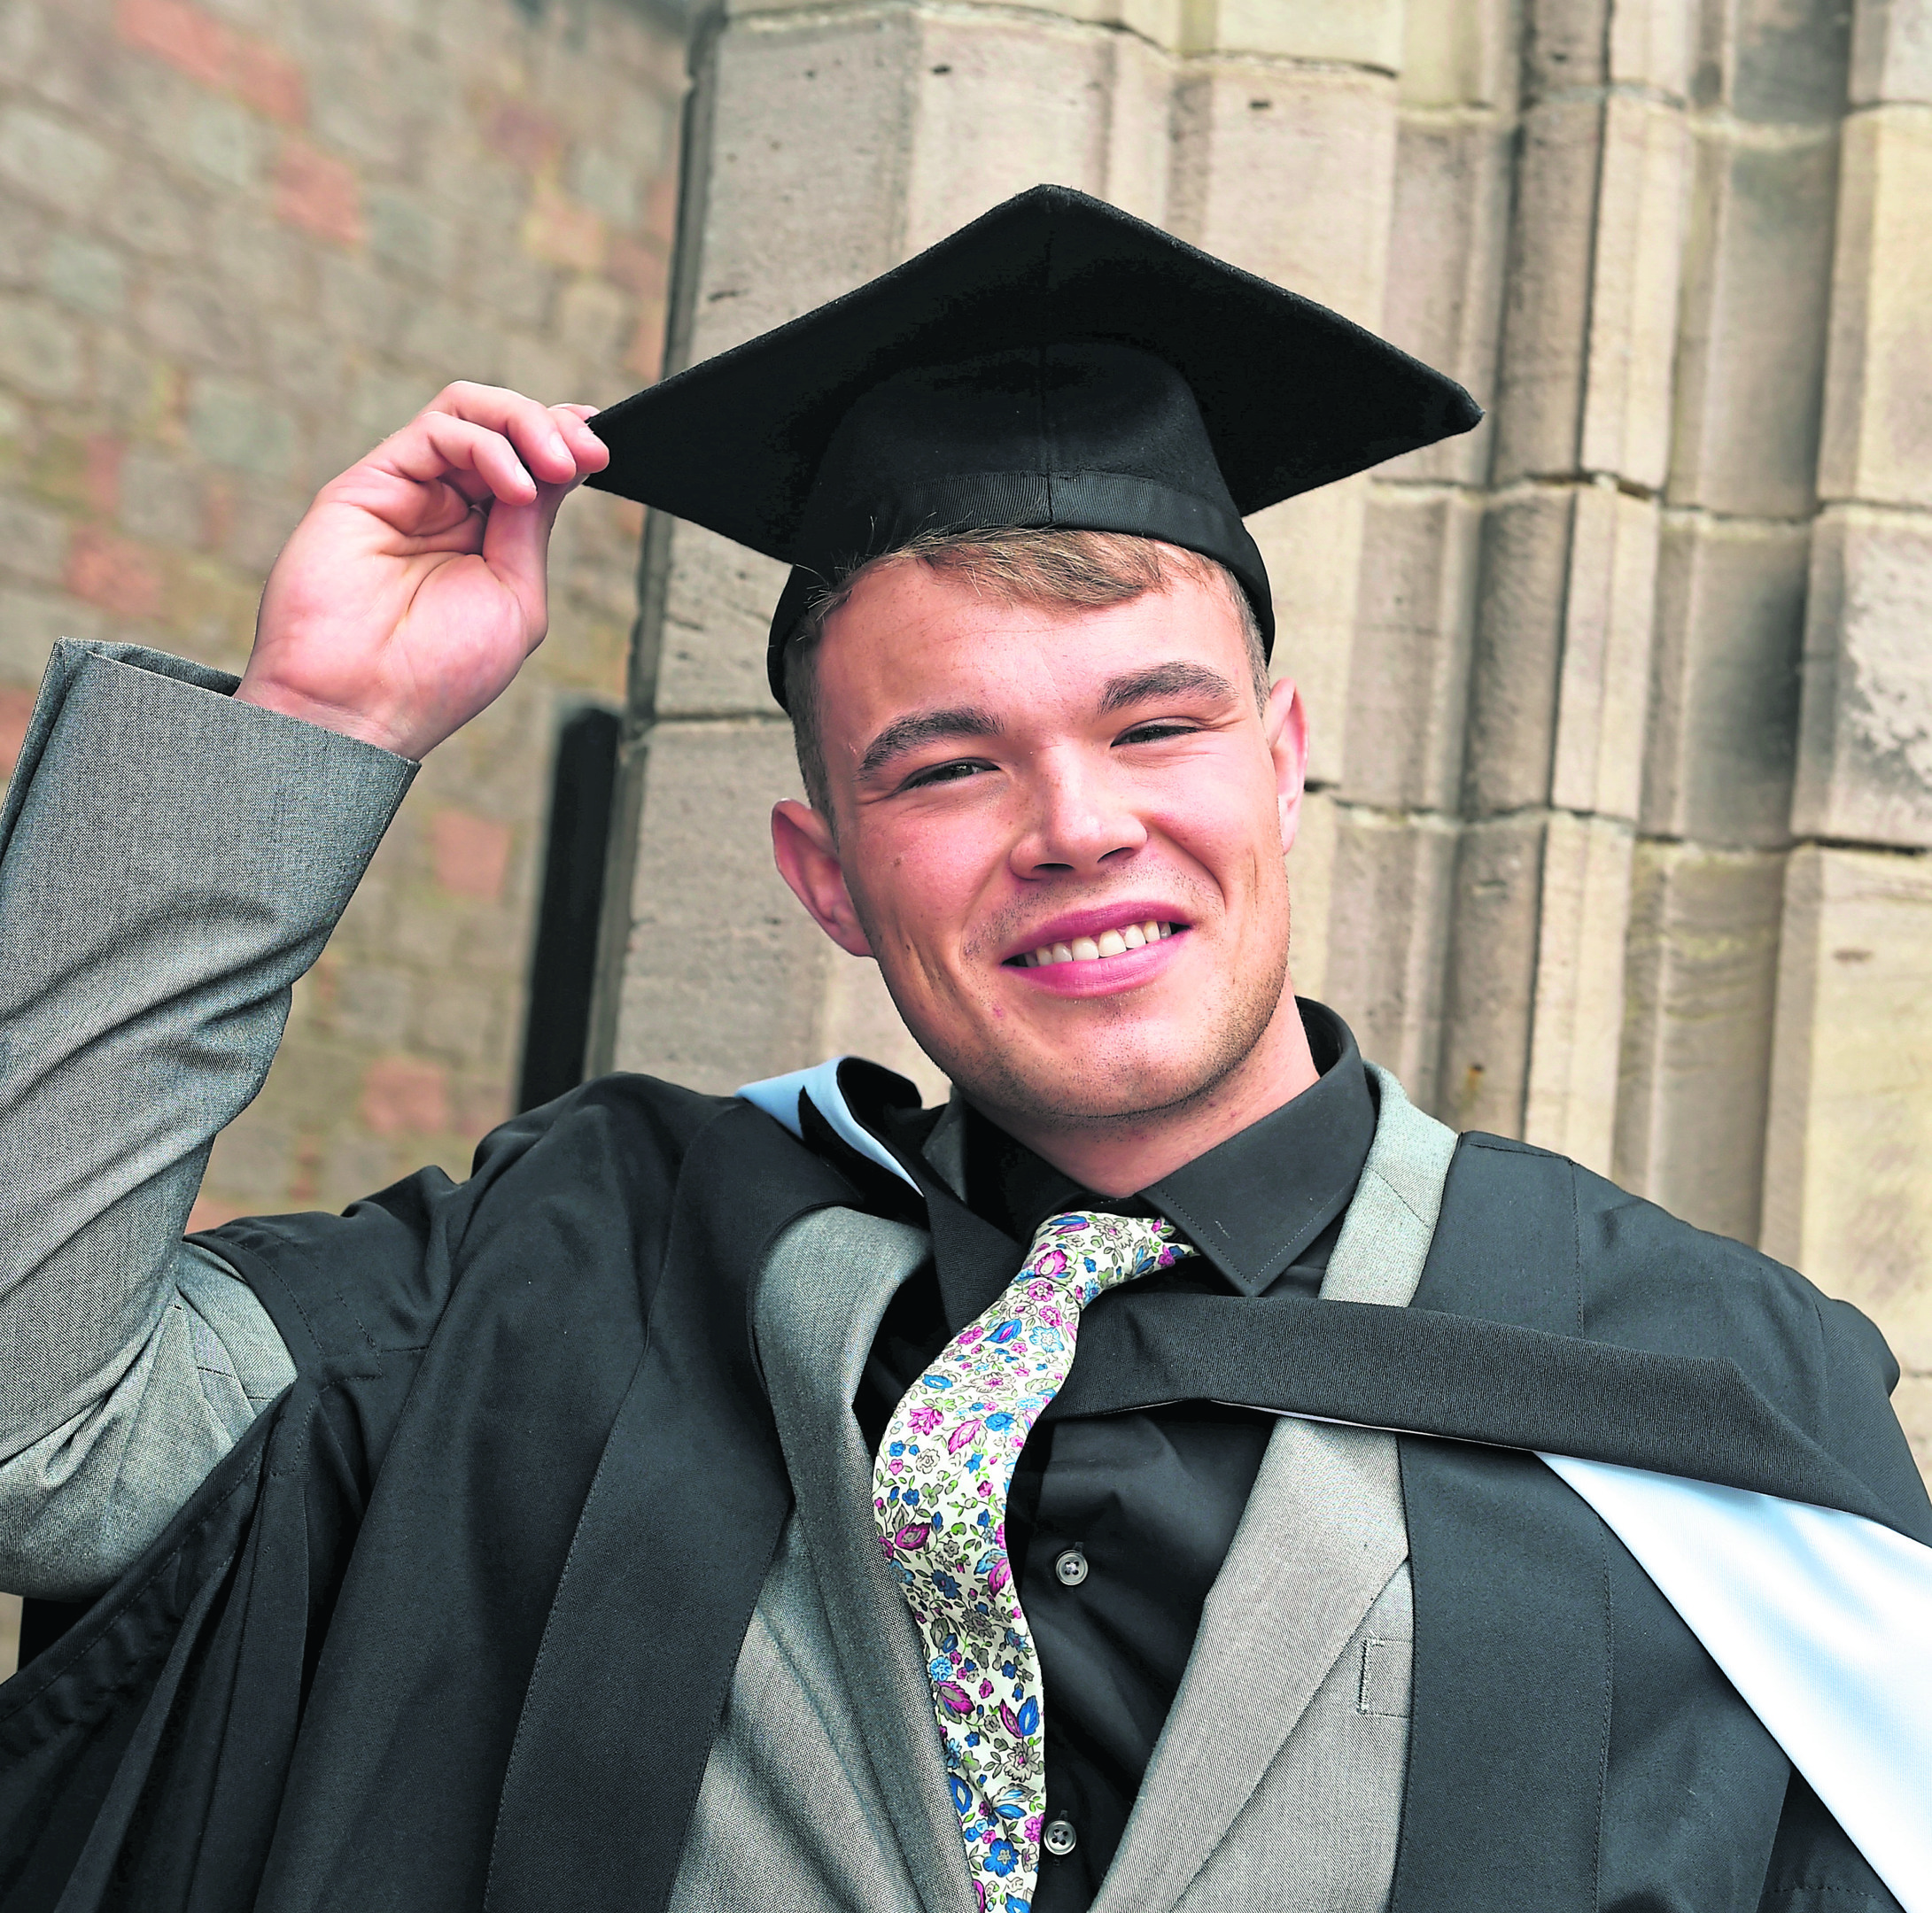 Ross Howarth graduated with an MA in Sociology